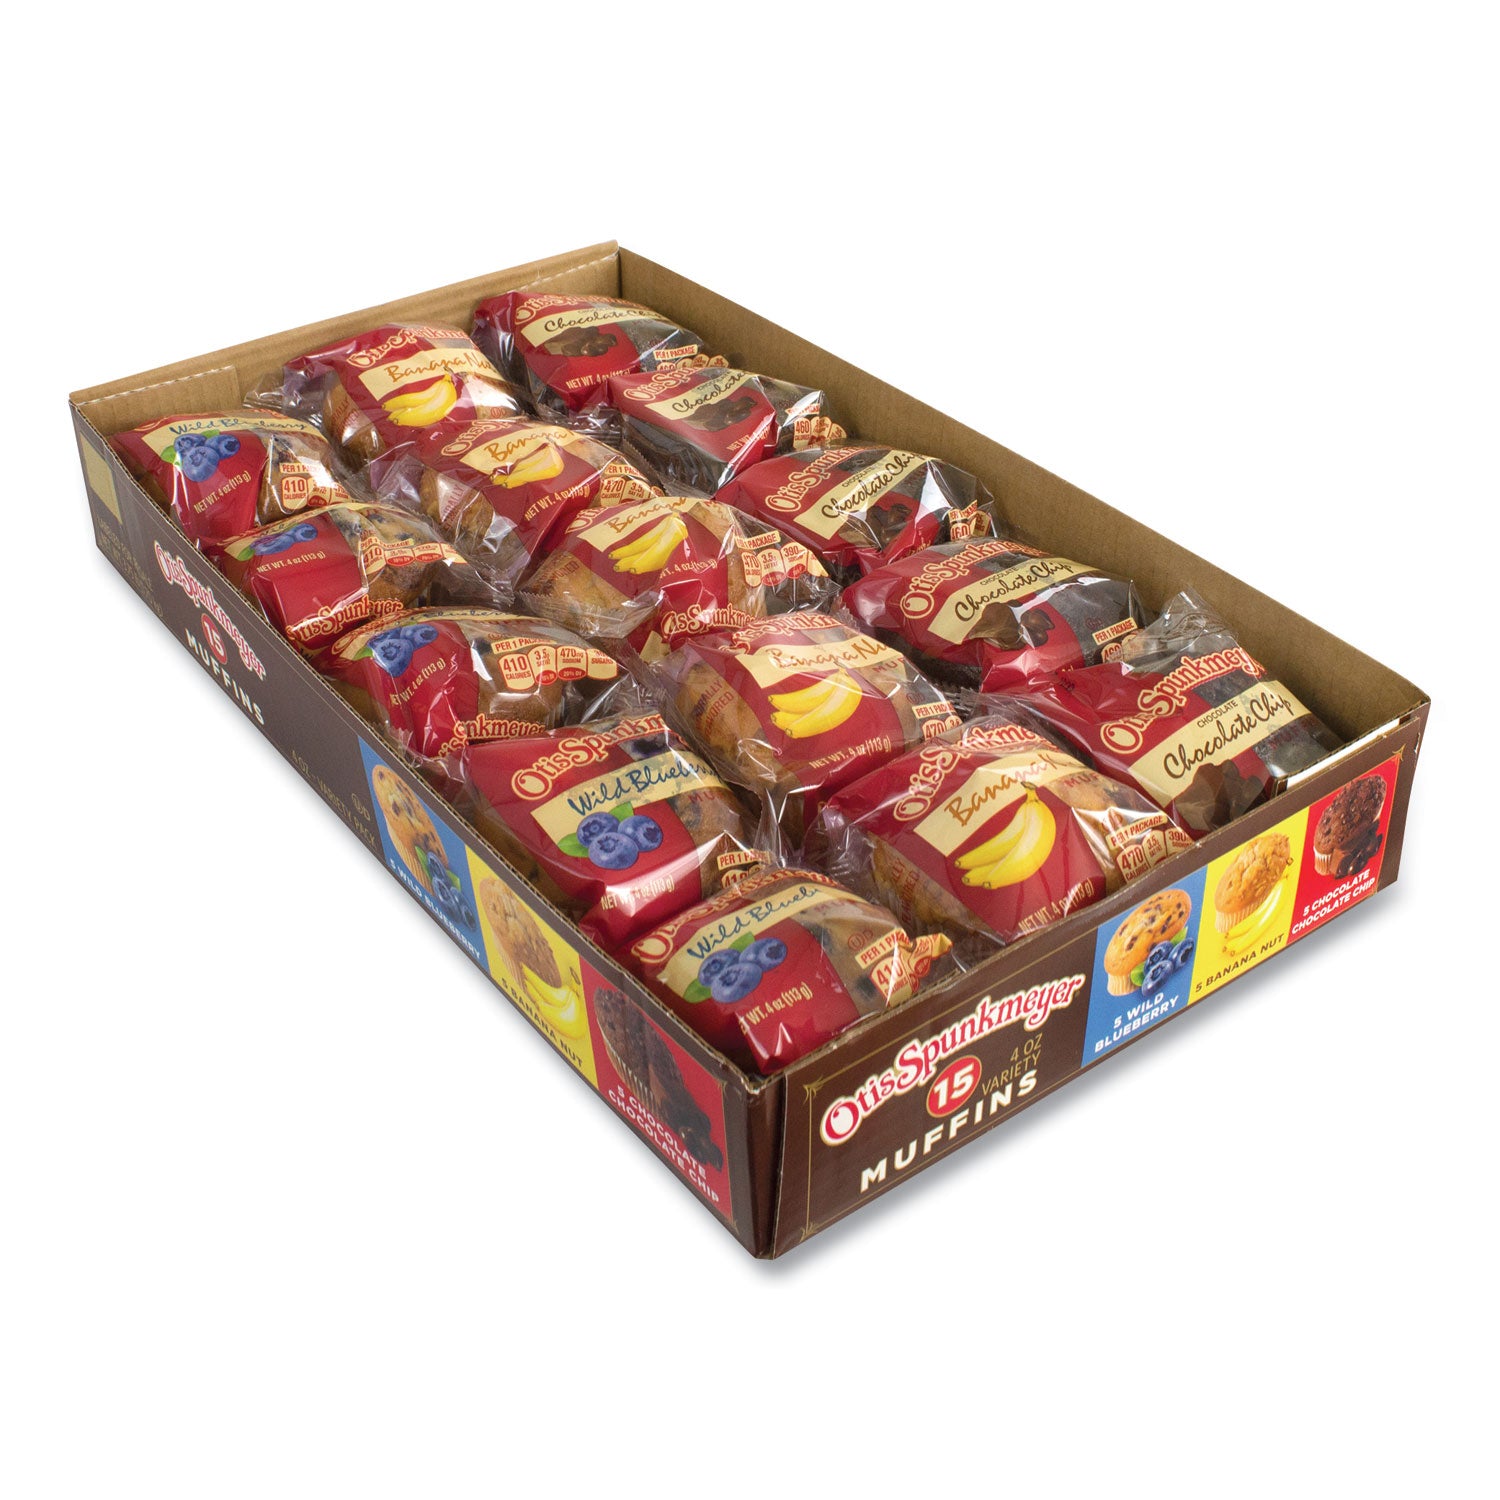 muffins-variety-pack-assorted-flavors-4-oz-pack-15-packs-carton-ships-in-1-3-business-days_grr90000067 - 1